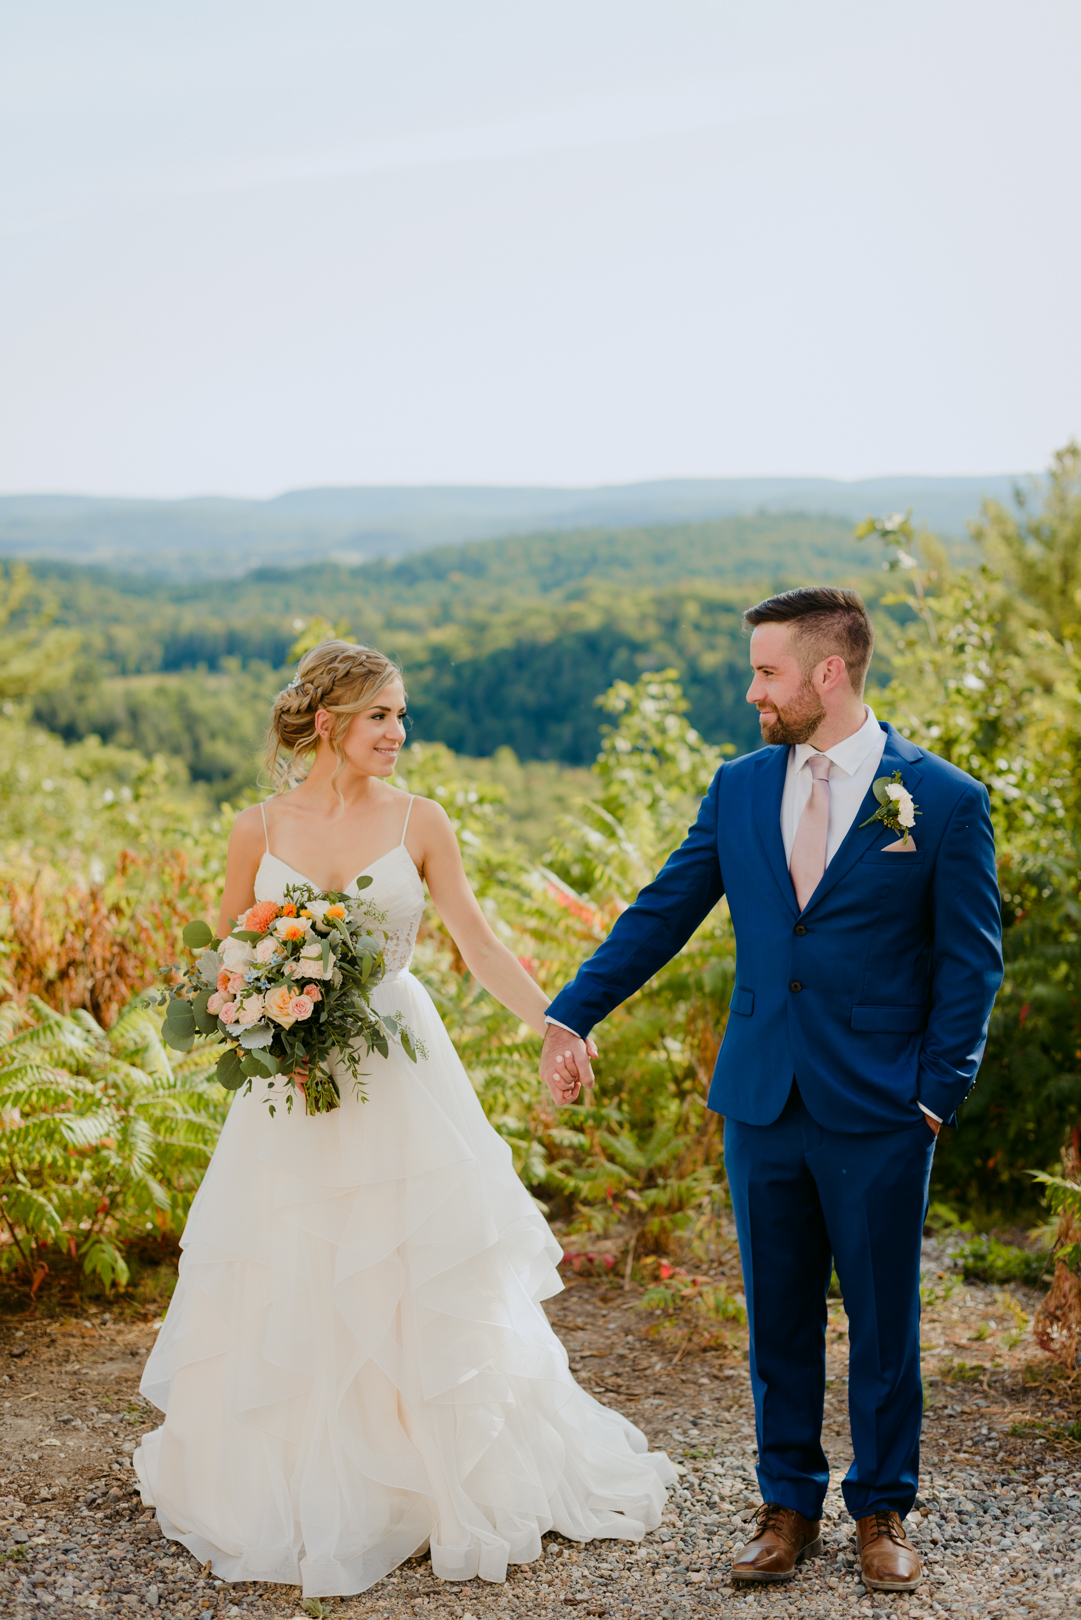 bride and groom with wild floral bouquet at le belvedere wedding